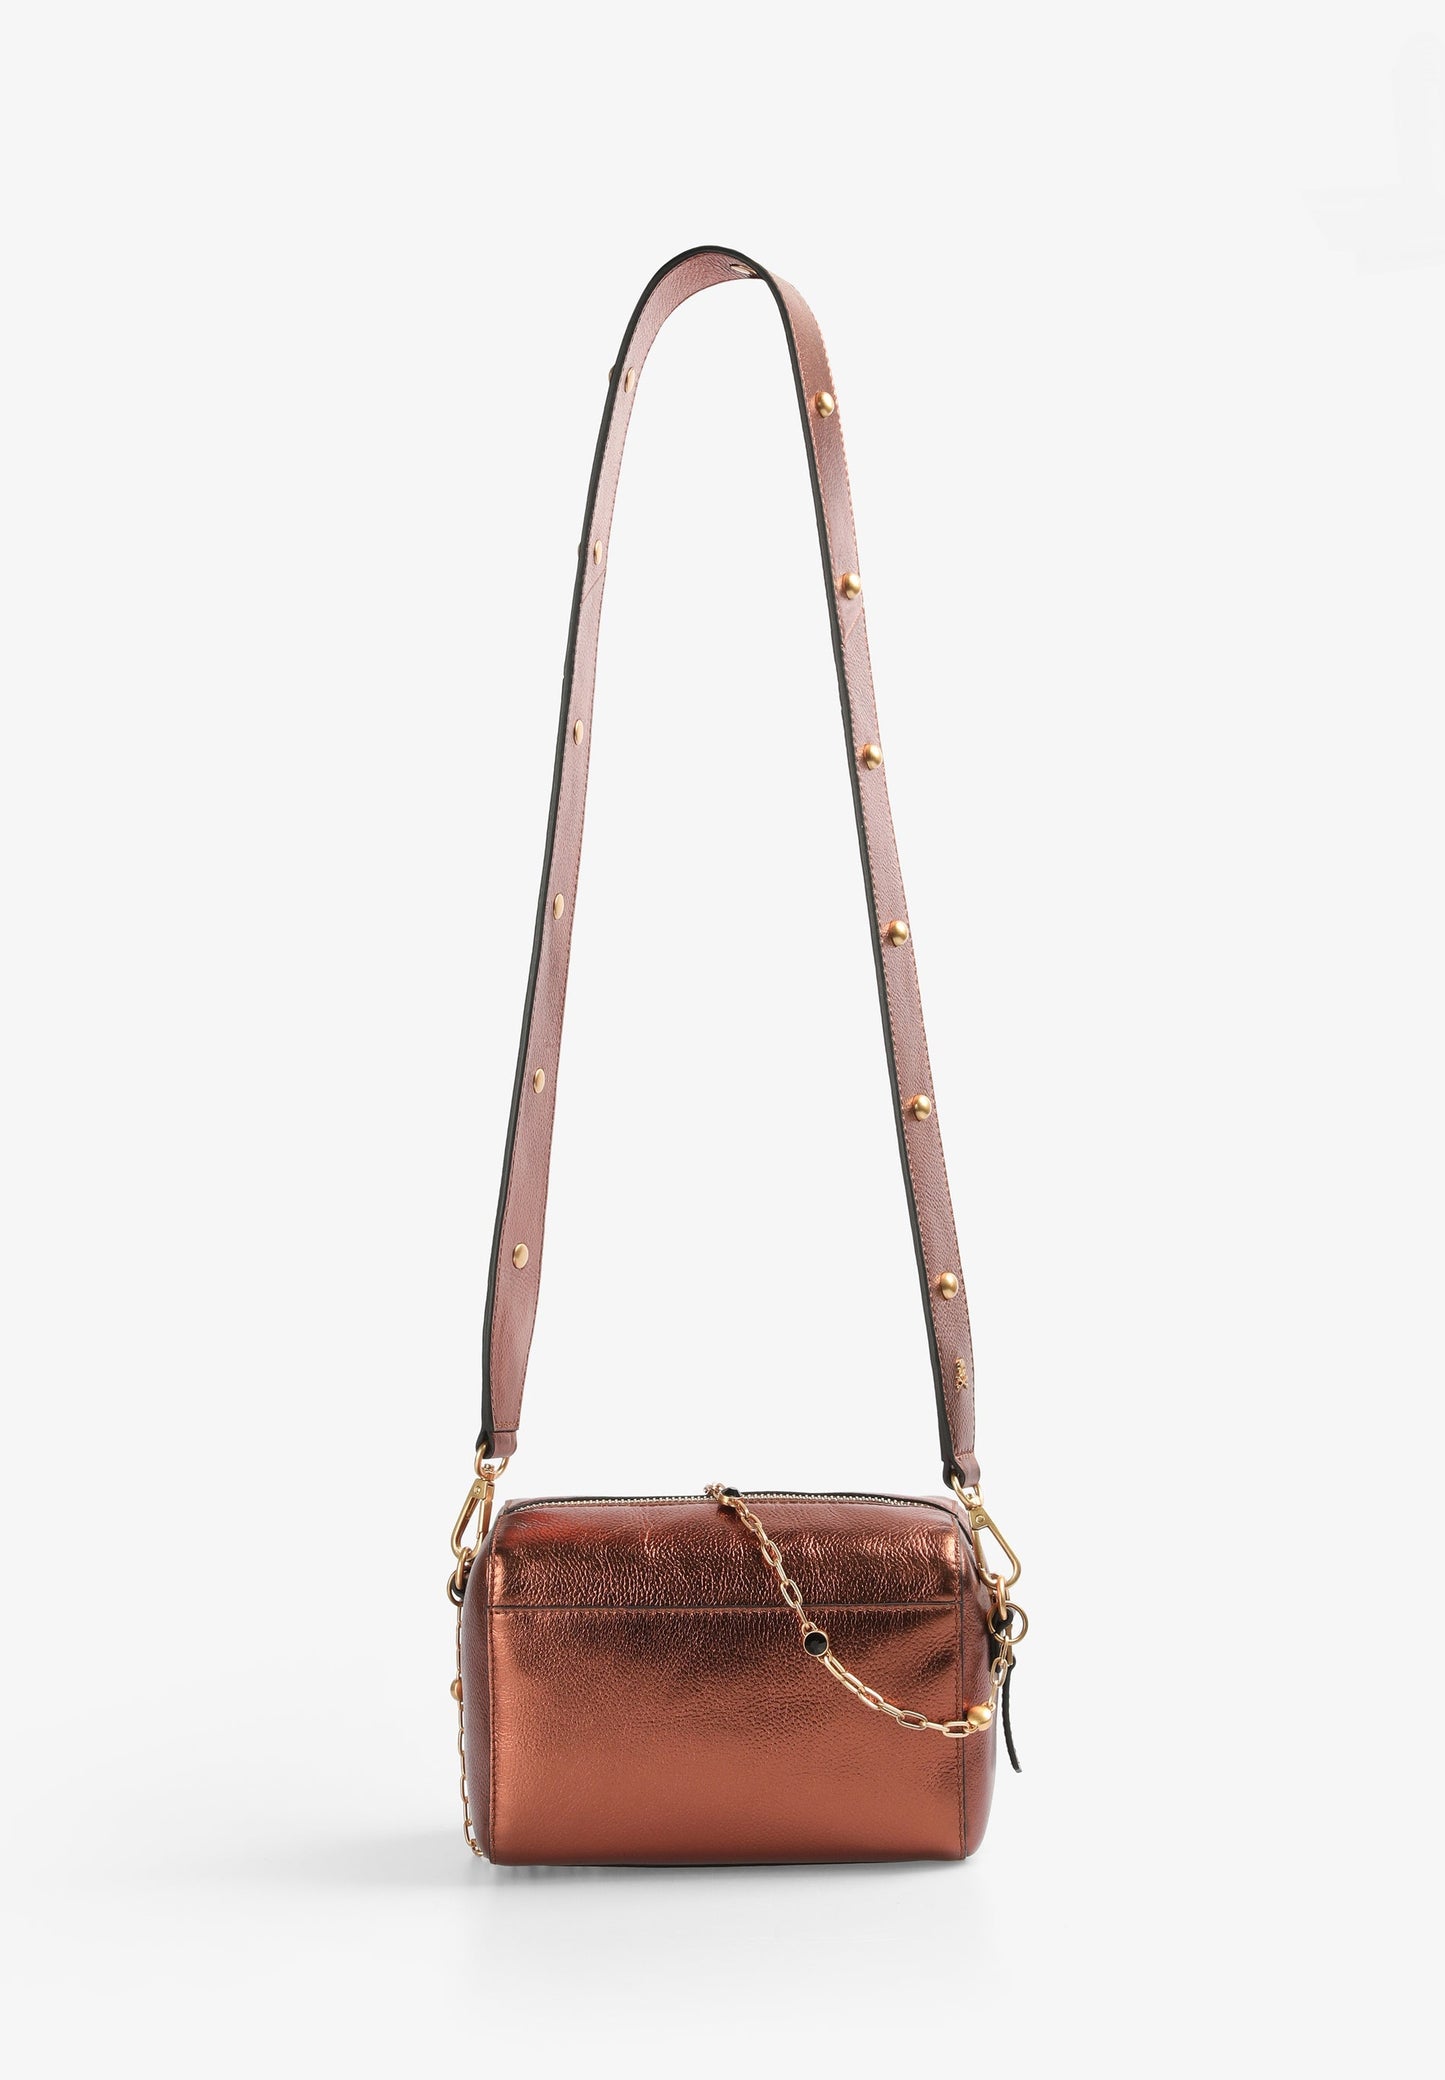 METALLIC LEATHER BAG WITH CHAIN STRAP